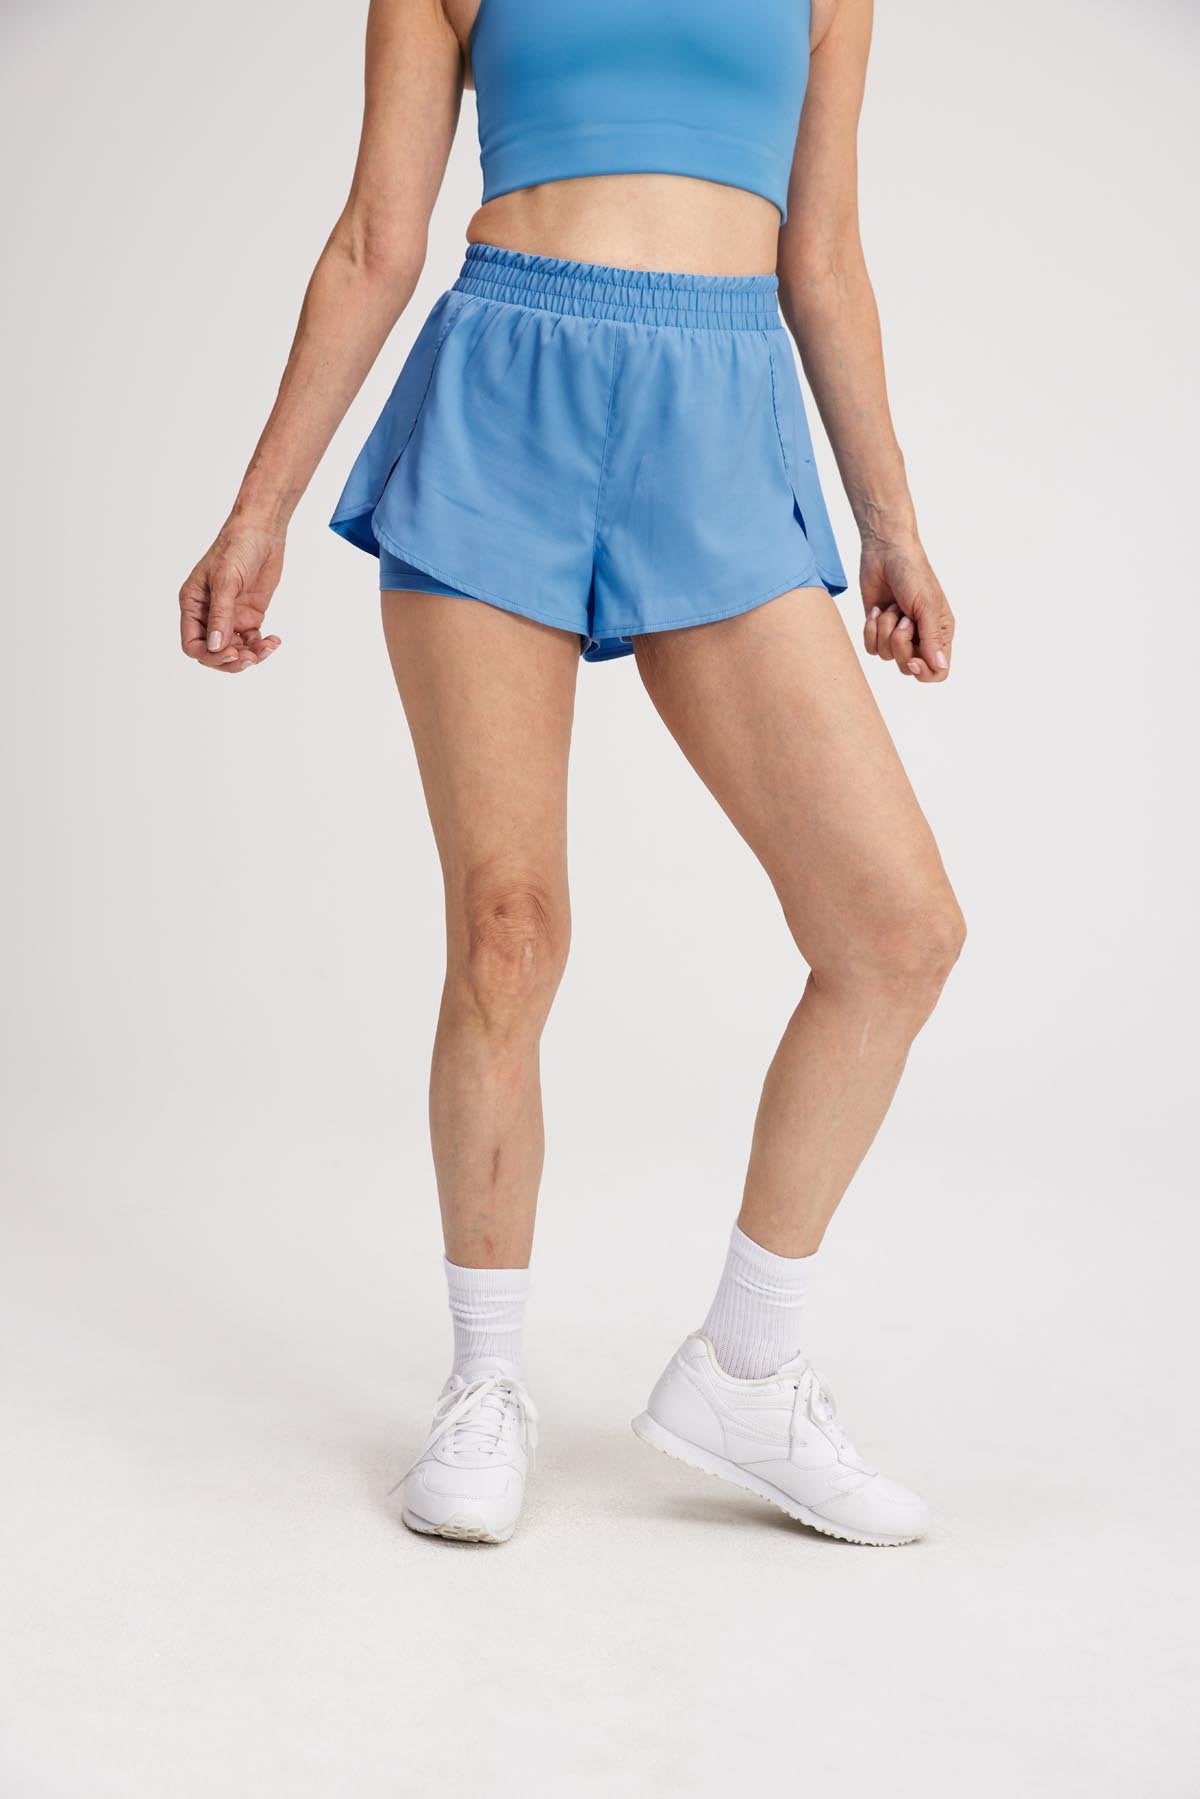 girlfriend collective trail shorts